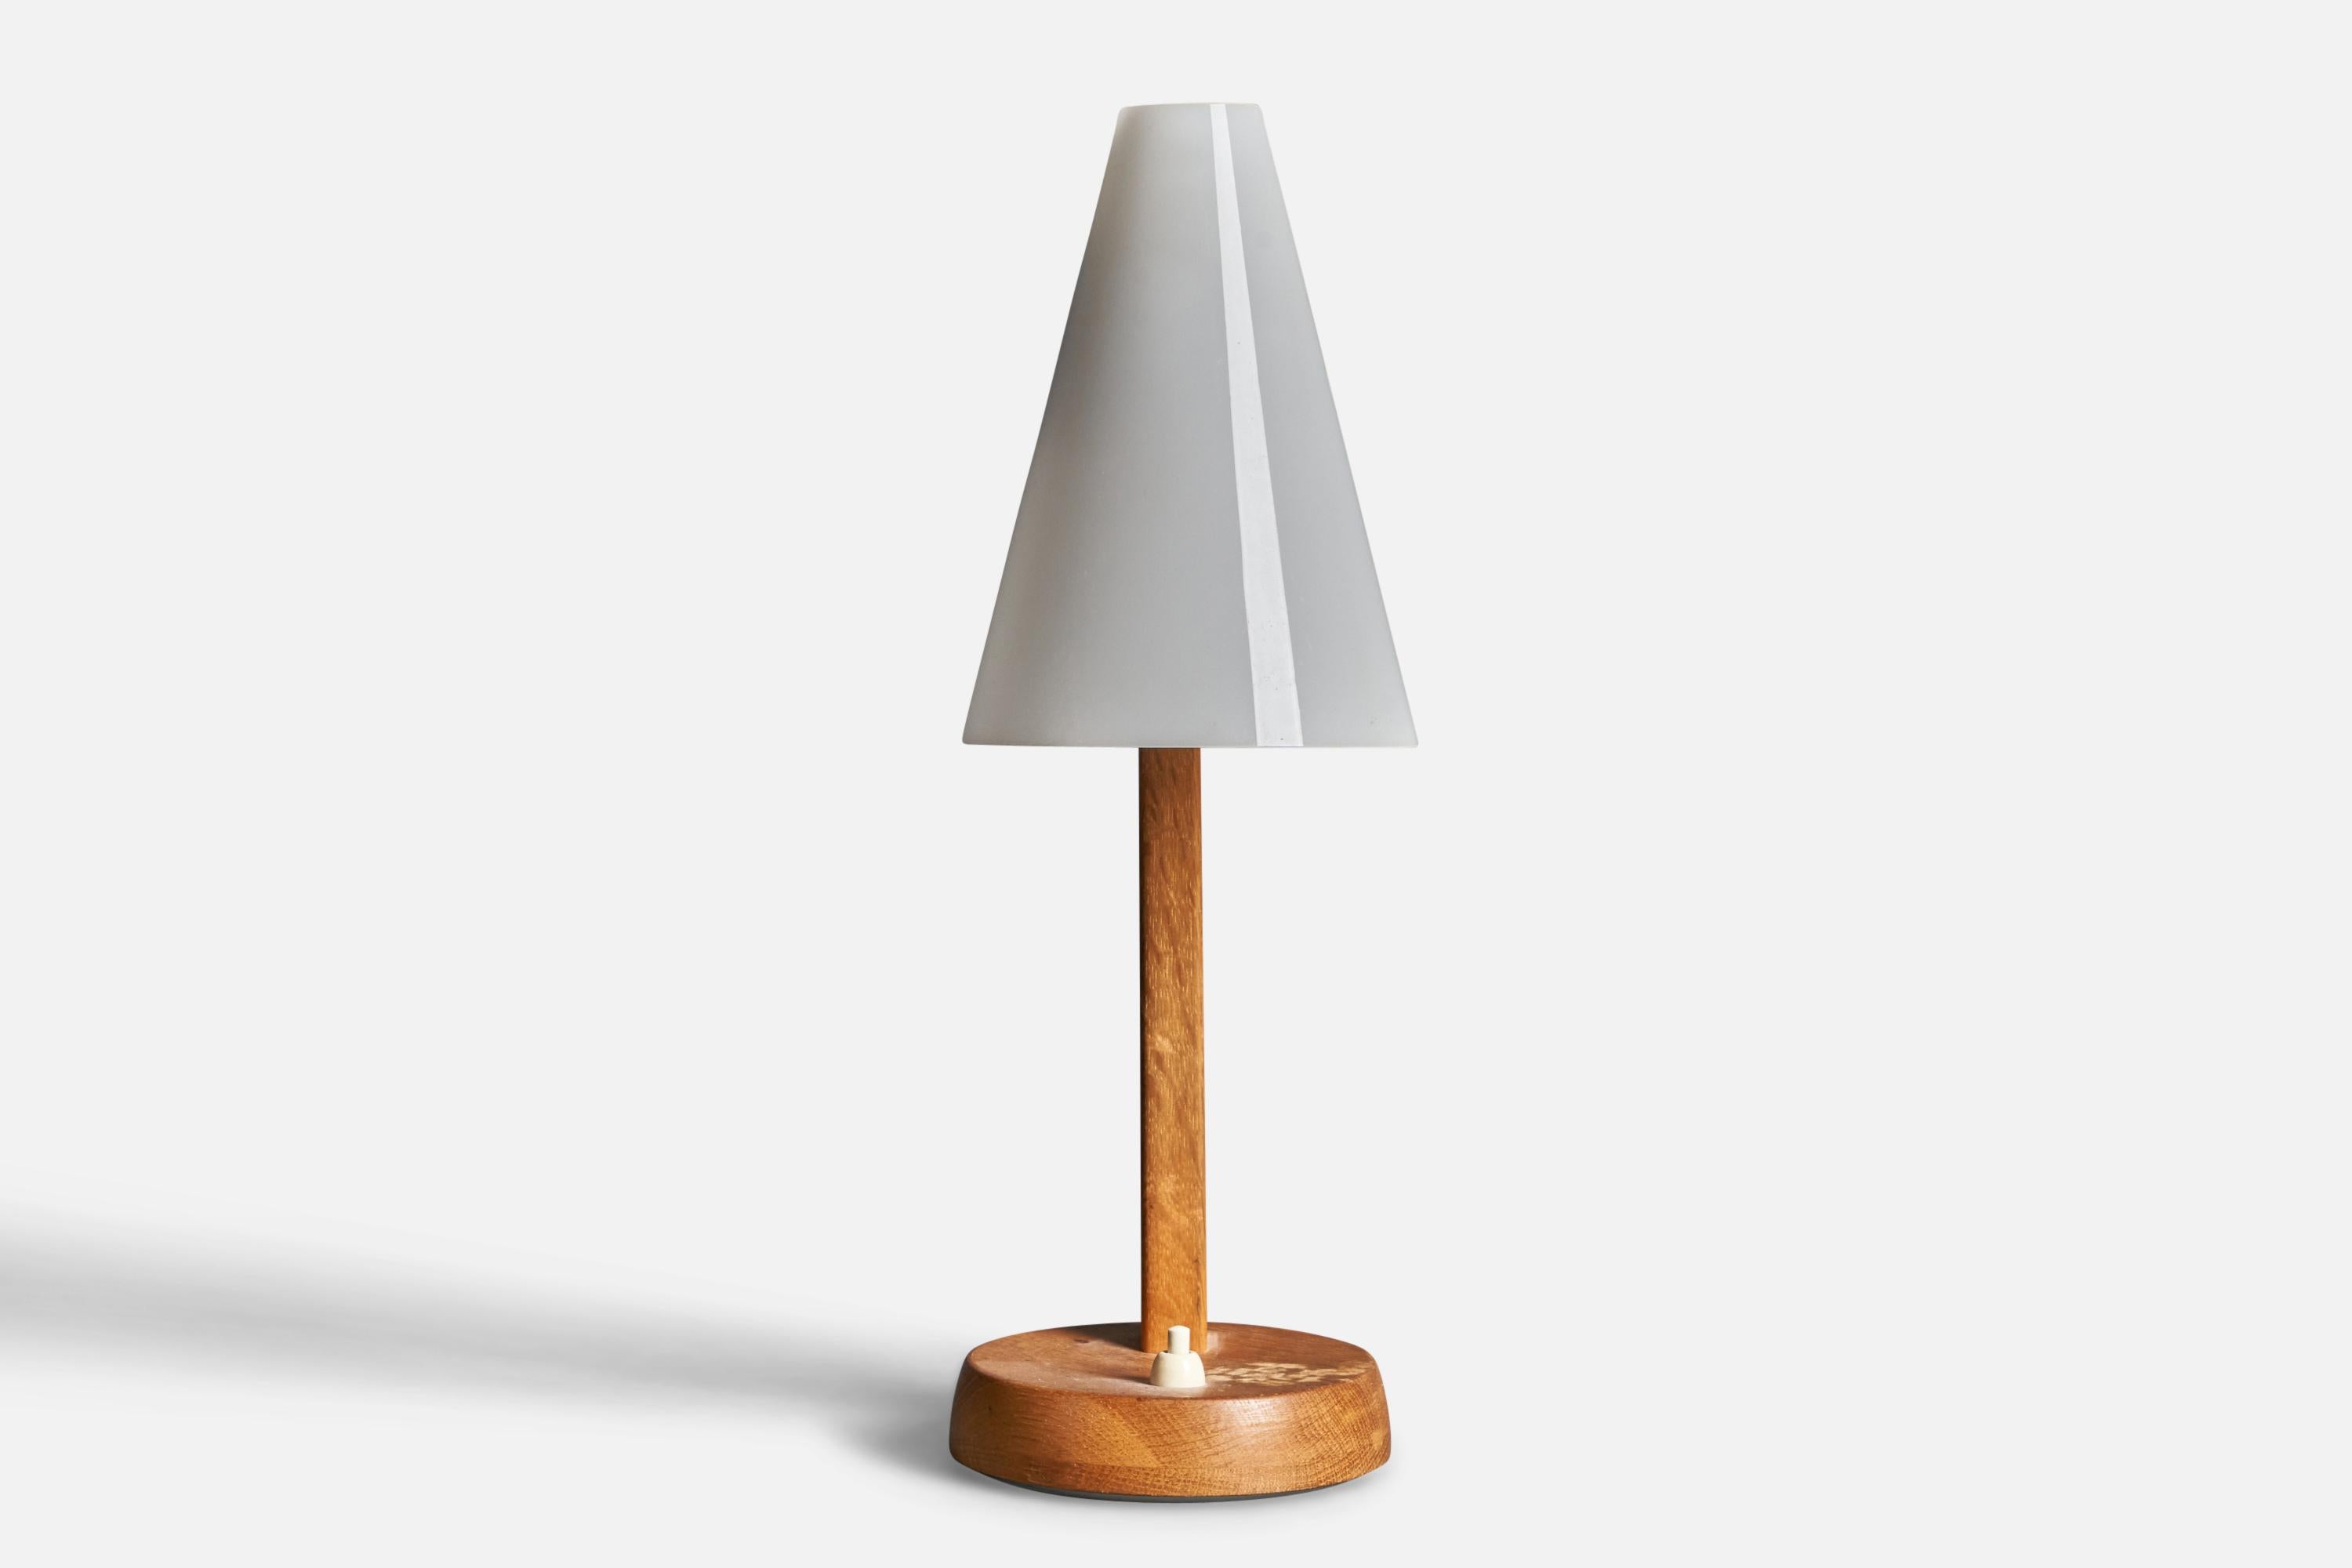 An adjustable table lamp or desk light. Produced by Falkenbergs Belysning. Stamped. In solid oak, brass details, acrylic lampshade.

Other designers of the period include Hans Bergström, Hans-Agne Jacobson, Alvar Aalto, Josef Frank, and Paavo